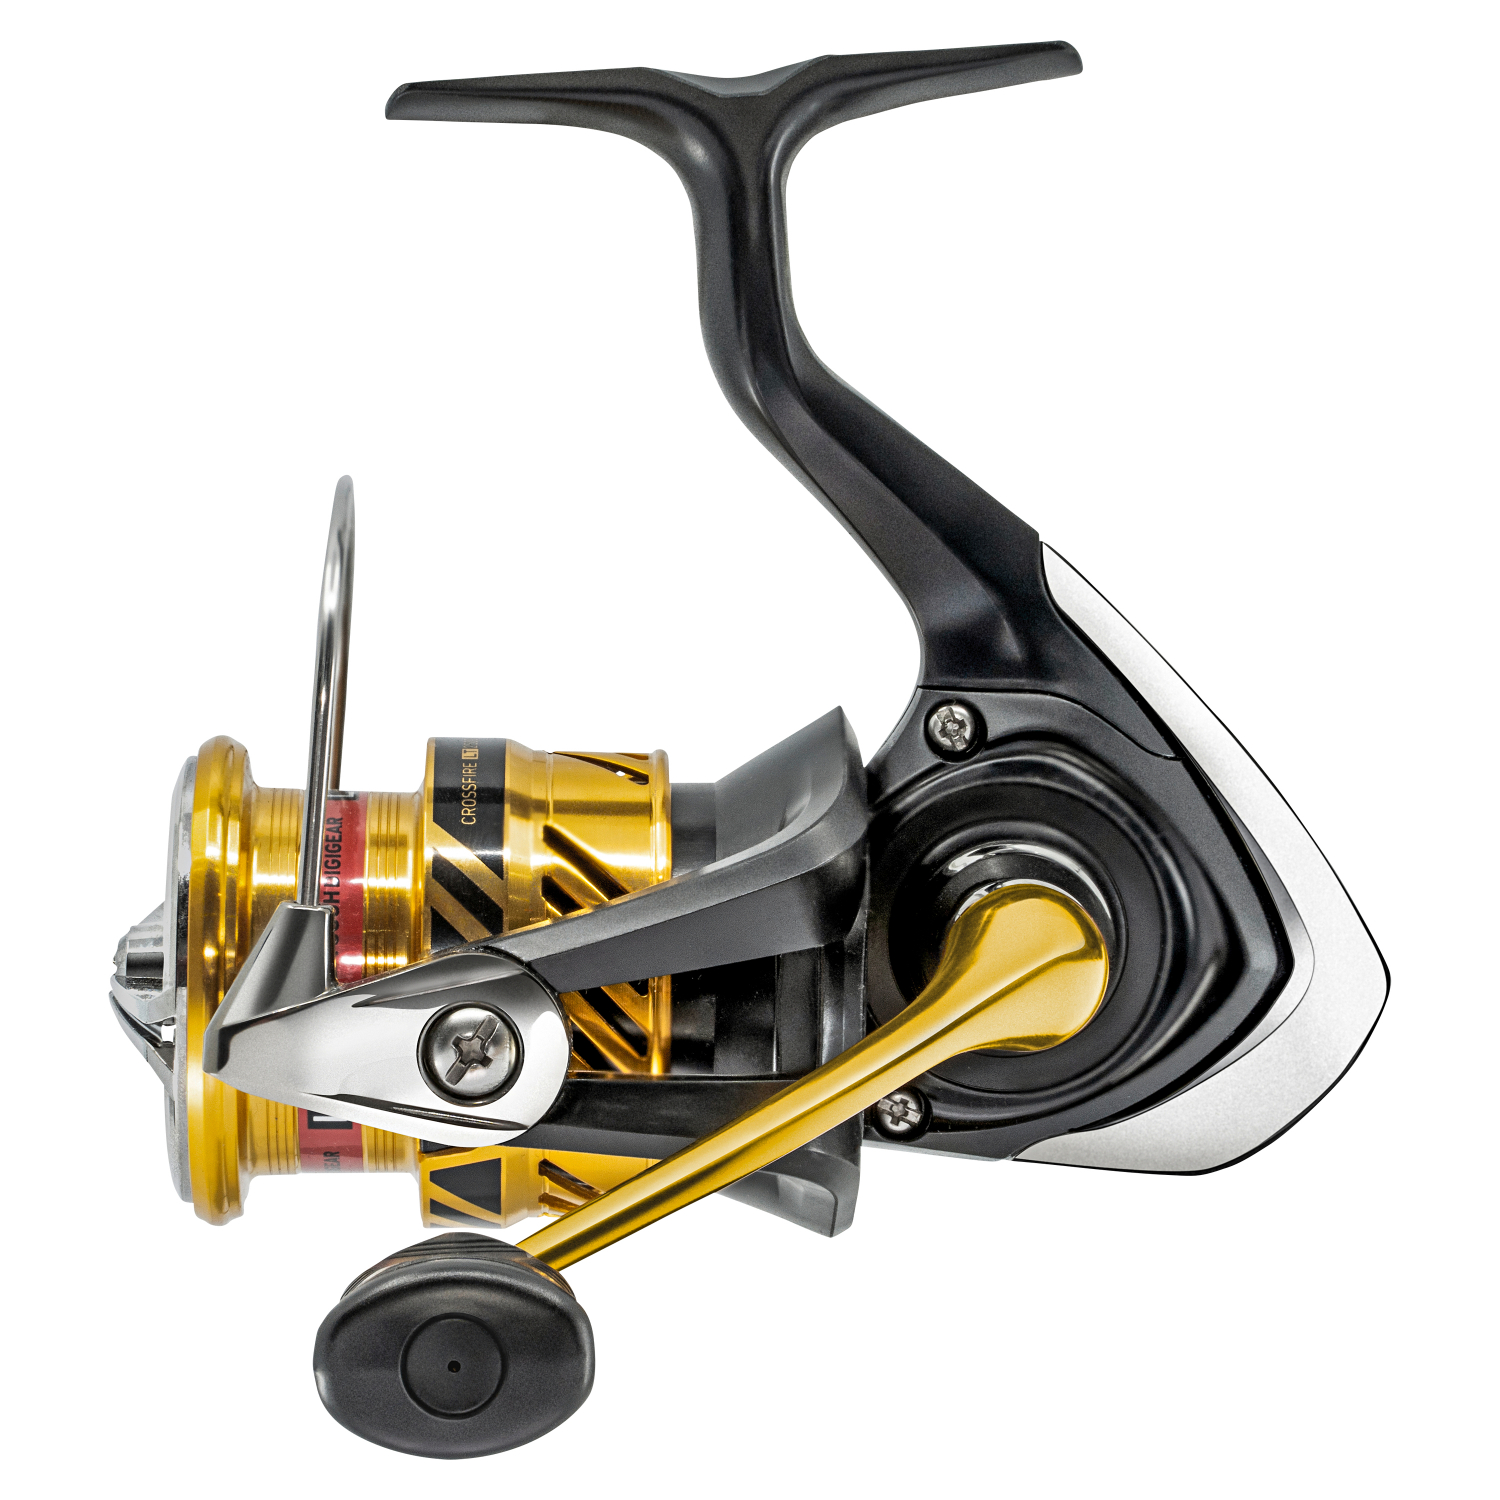 Daiwa Spinning reel Crossfire LT at low prices